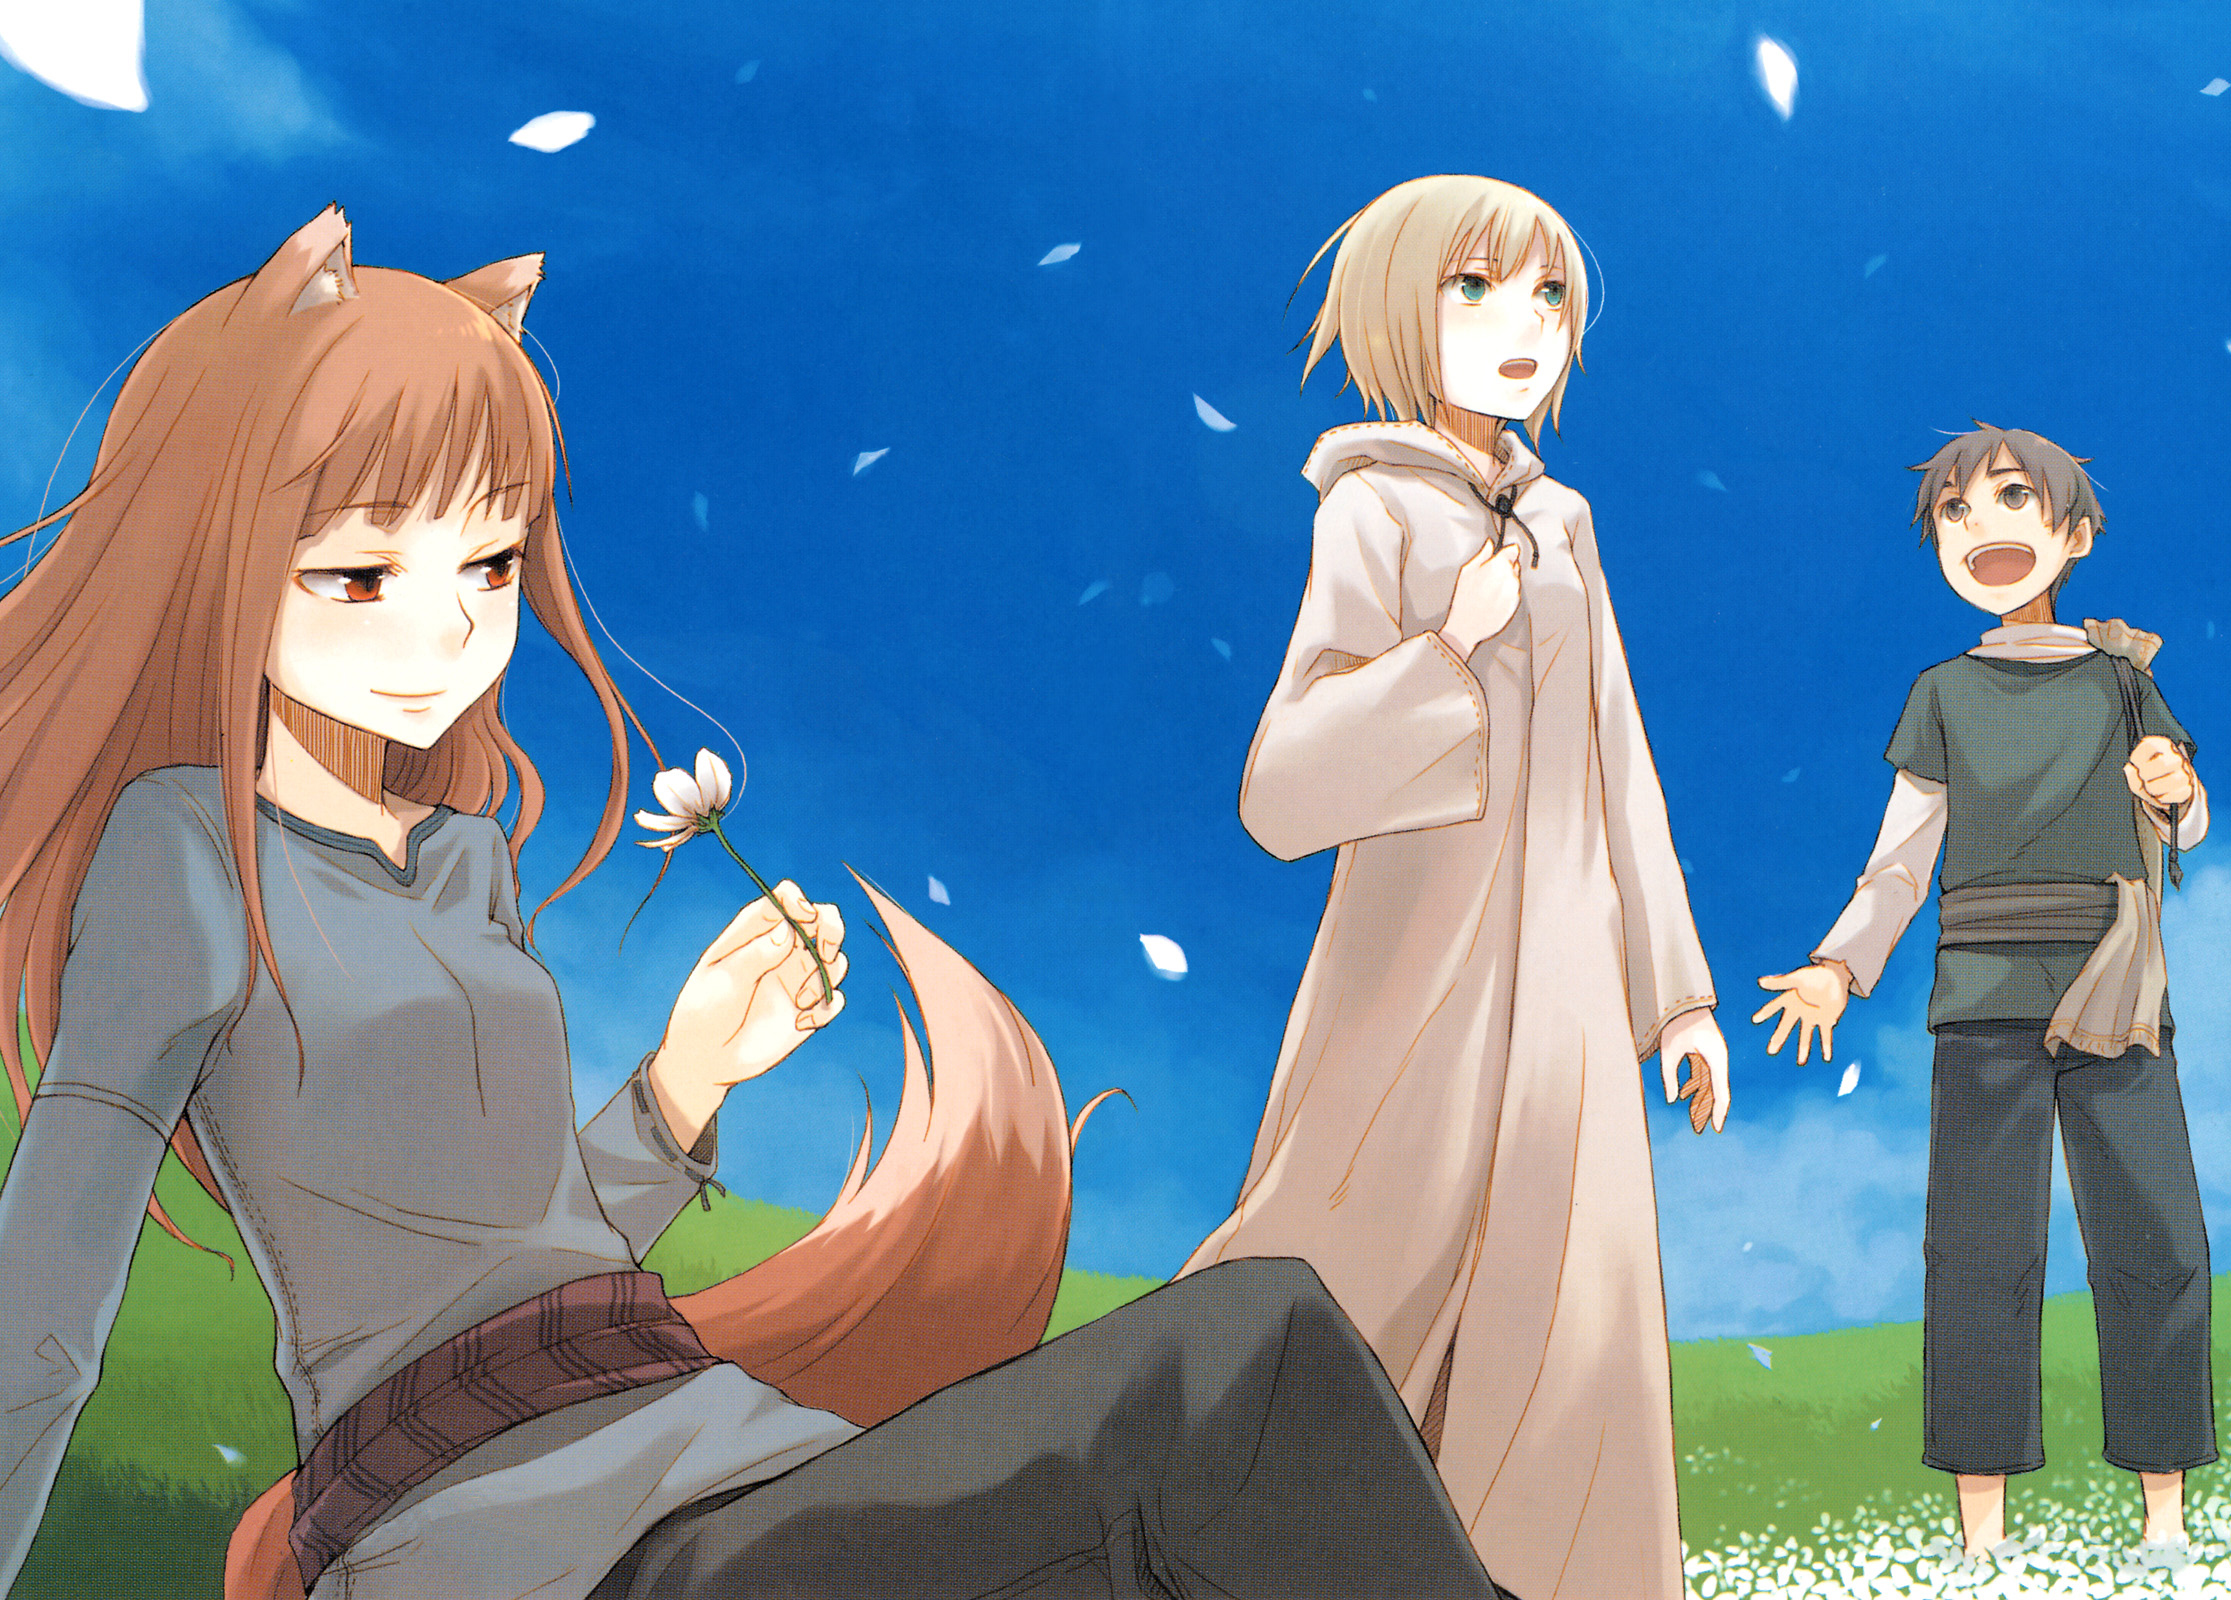 Spice and Wolf, anime - desktop wallpaper